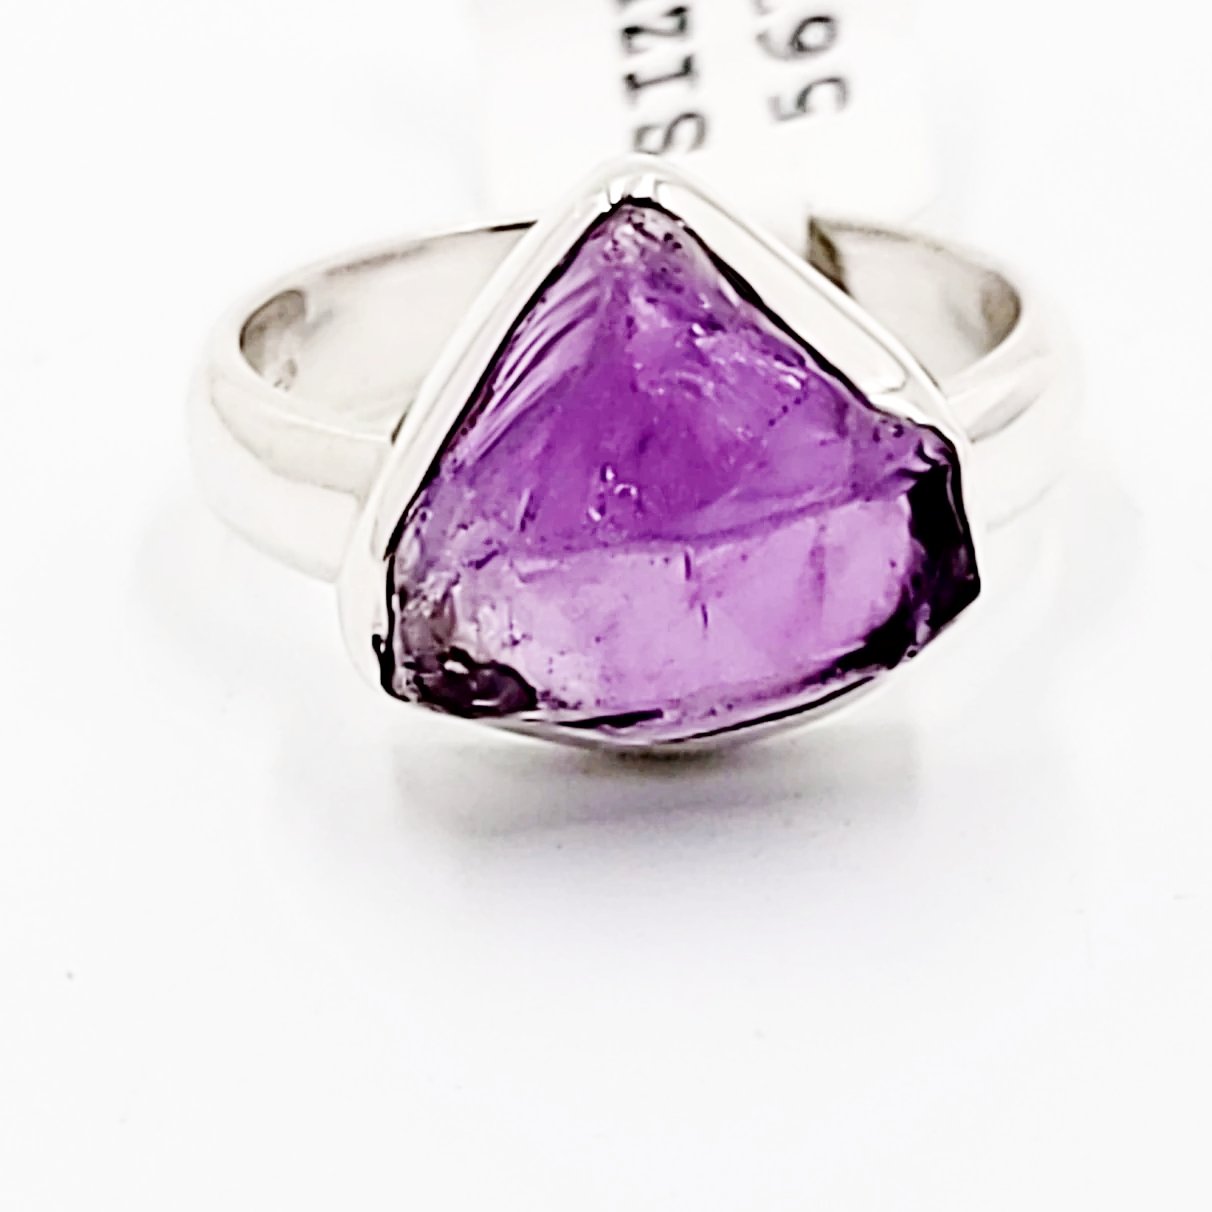 Amethyst Ring Sterling Silver Rough Stone Trillion Cut - Elevated Metaphysical